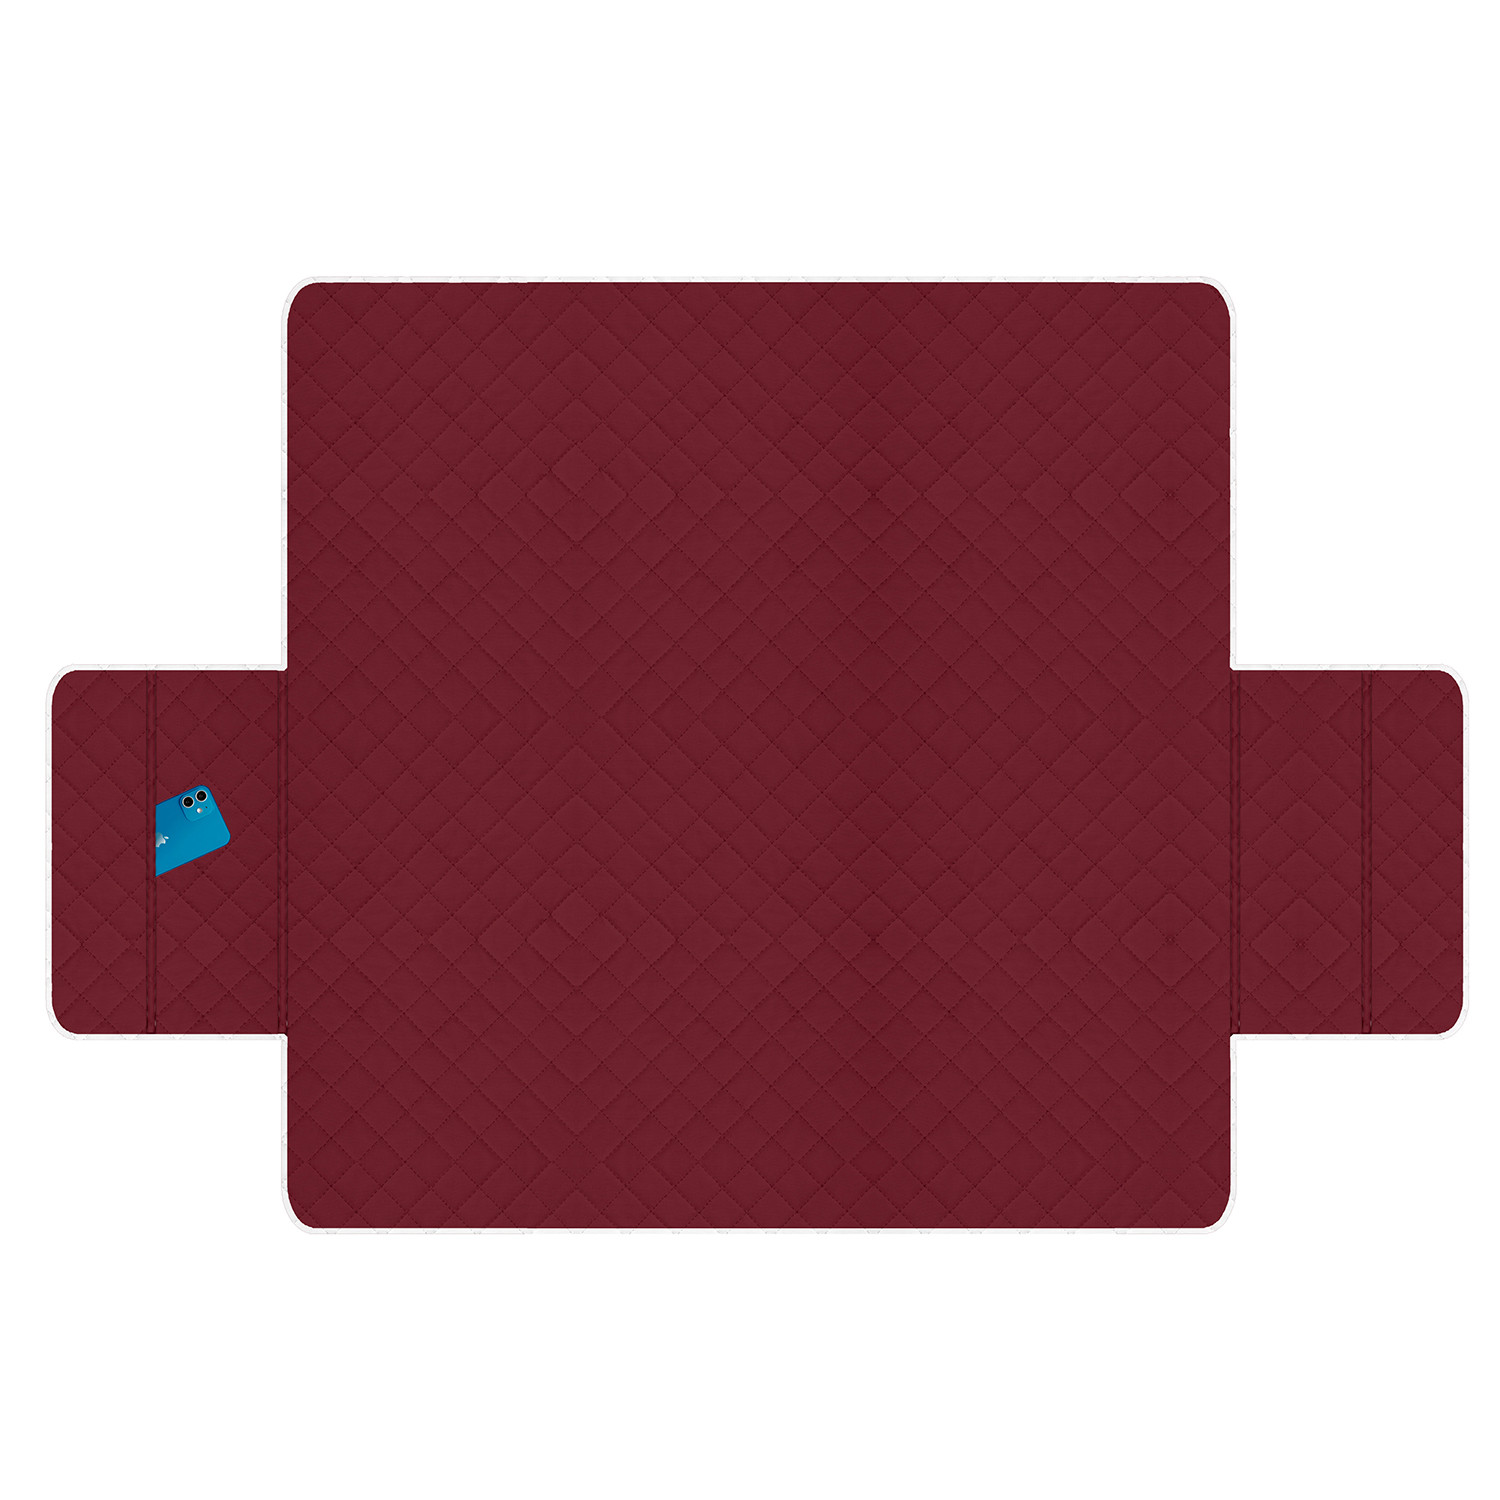 Kuber Industries Both Sided 2+1 Seater Sofa Cover|Polyester Check Design Couch Cover|Non-Slip Stretchy Sofa Slipcovers (Maroon & Gray)